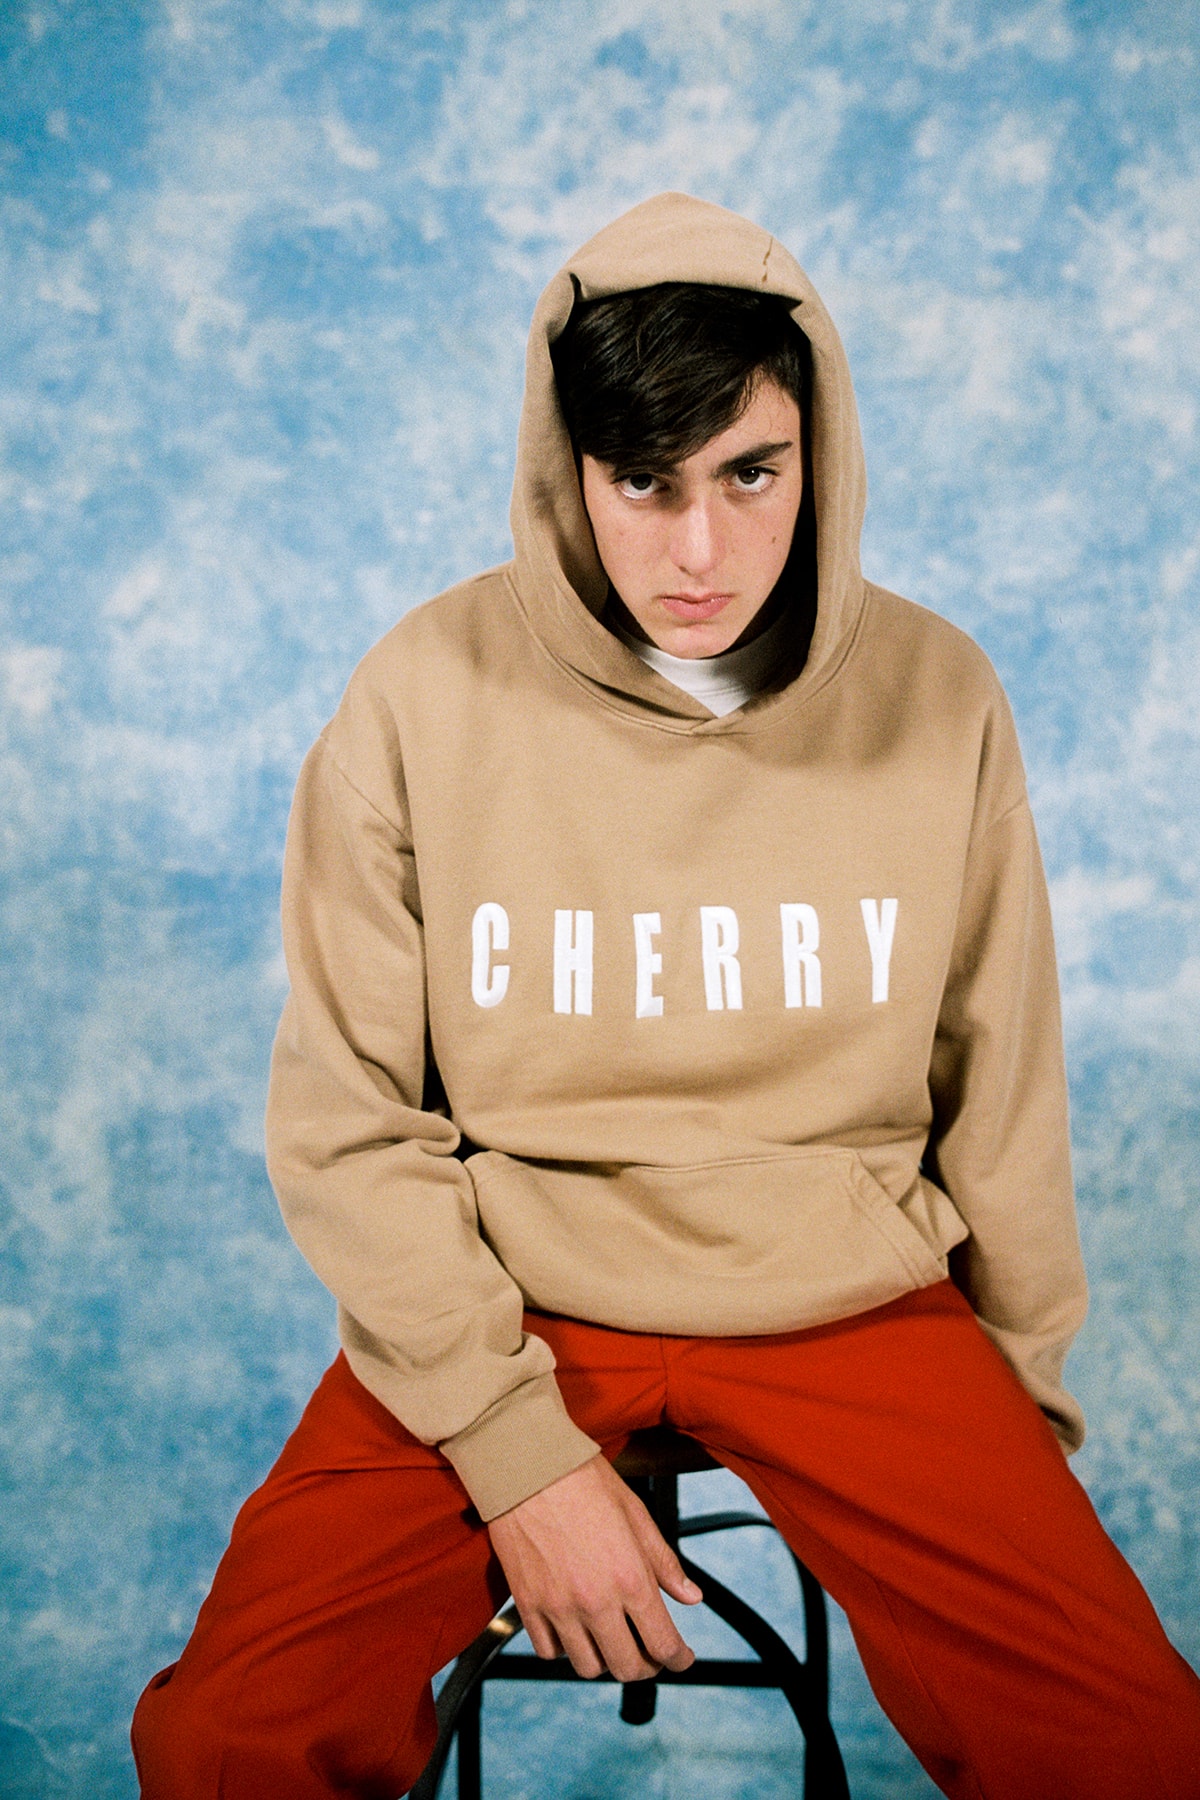 Cherry Los Angeles ADHD Lookbook collection NYC Pop-Up fall winter 2018 release imagery official hoodie pants converse tank top shirt tee buy purchase sell september 7 8 9 2018 drop date info